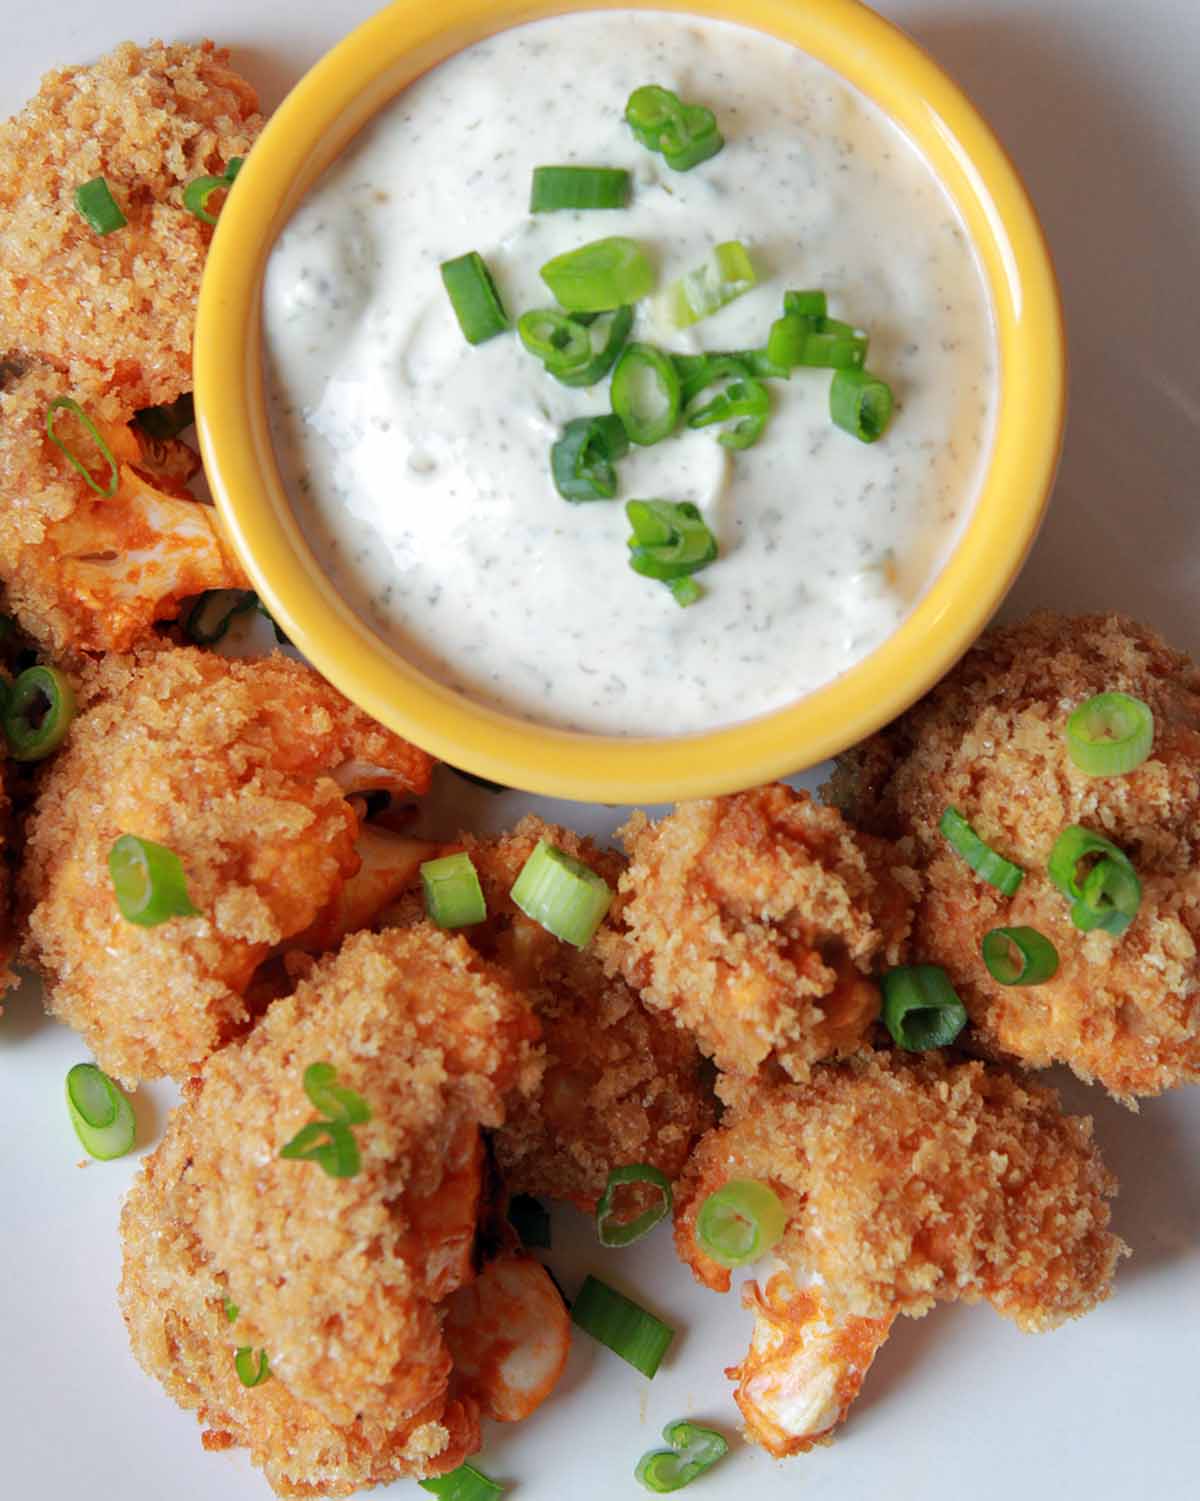 a plate full of low carb buffalo cauliflower with ranch dip